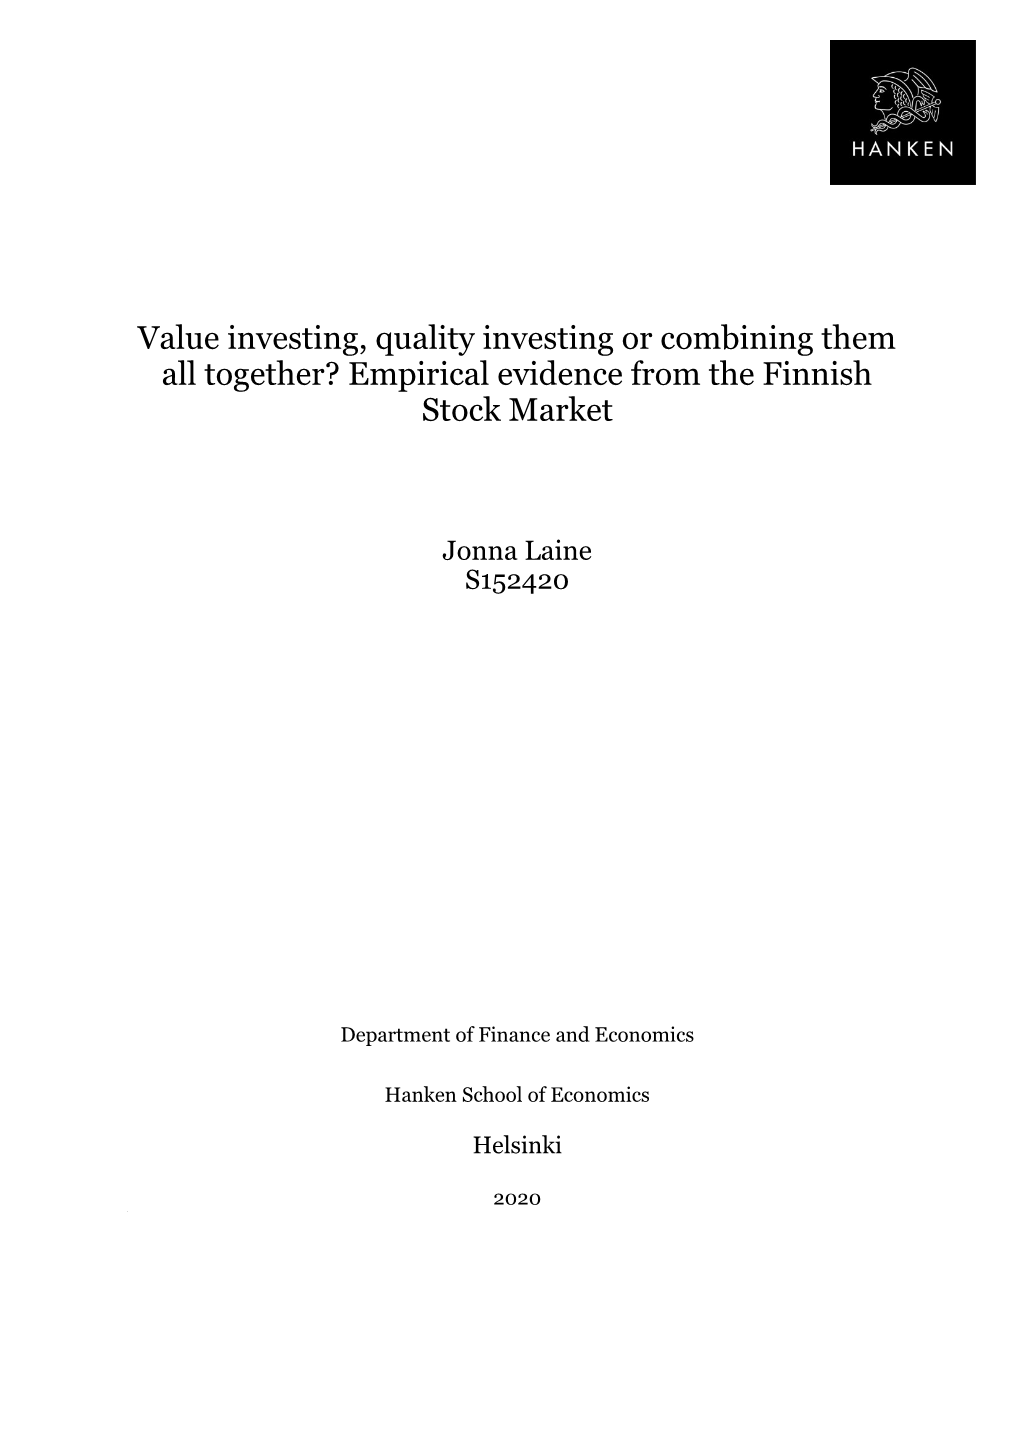 Value Investing, Quality Investing Or Combining Them All Together? Empirical Evidence from the Finnish Stock Market